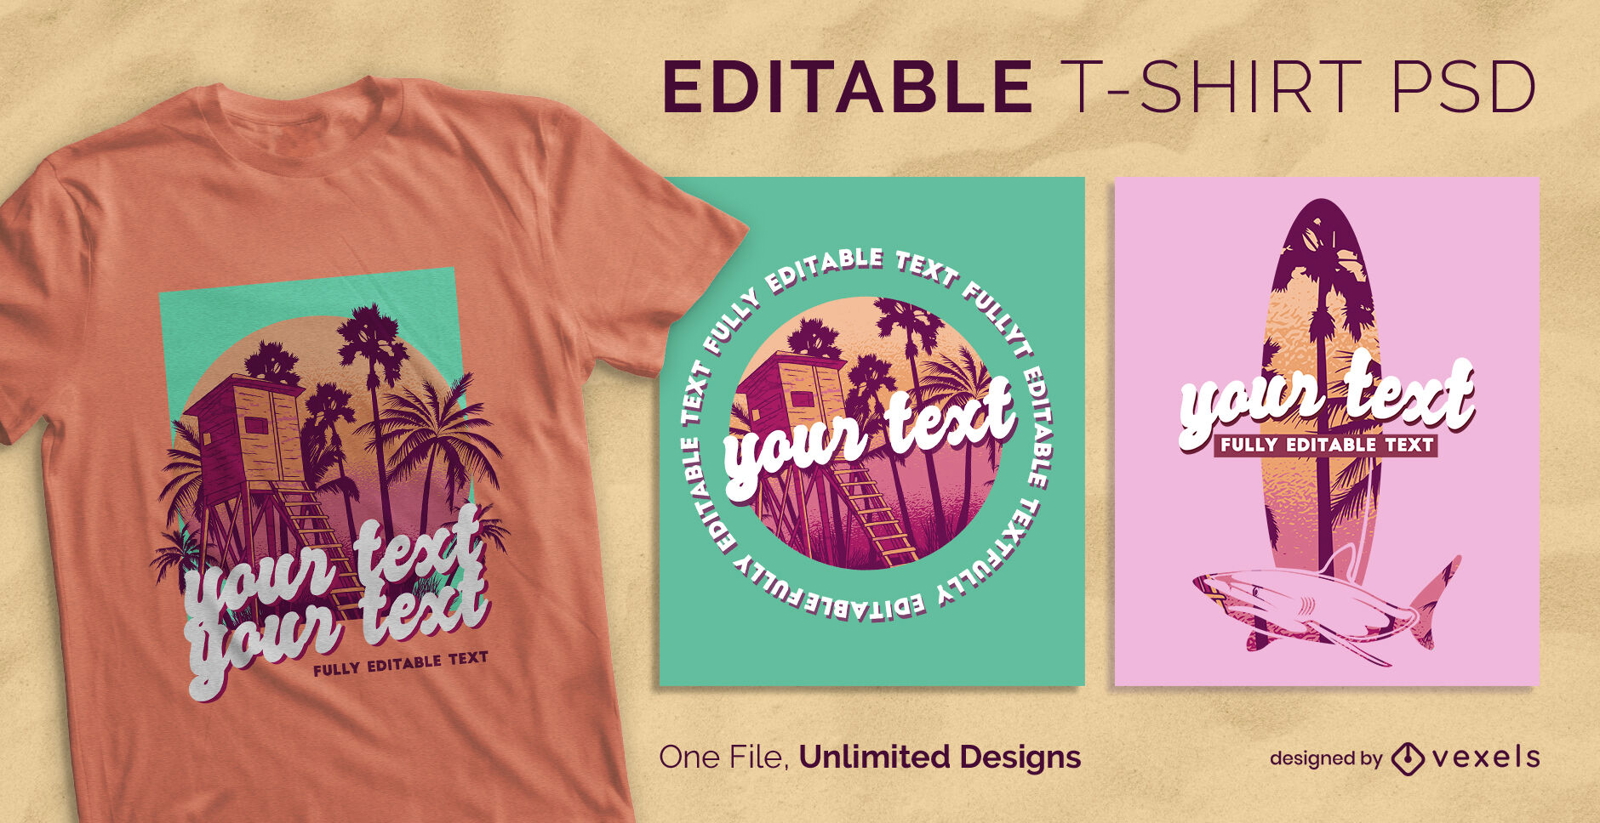 Surfing retro summer scalable t-shirt psd